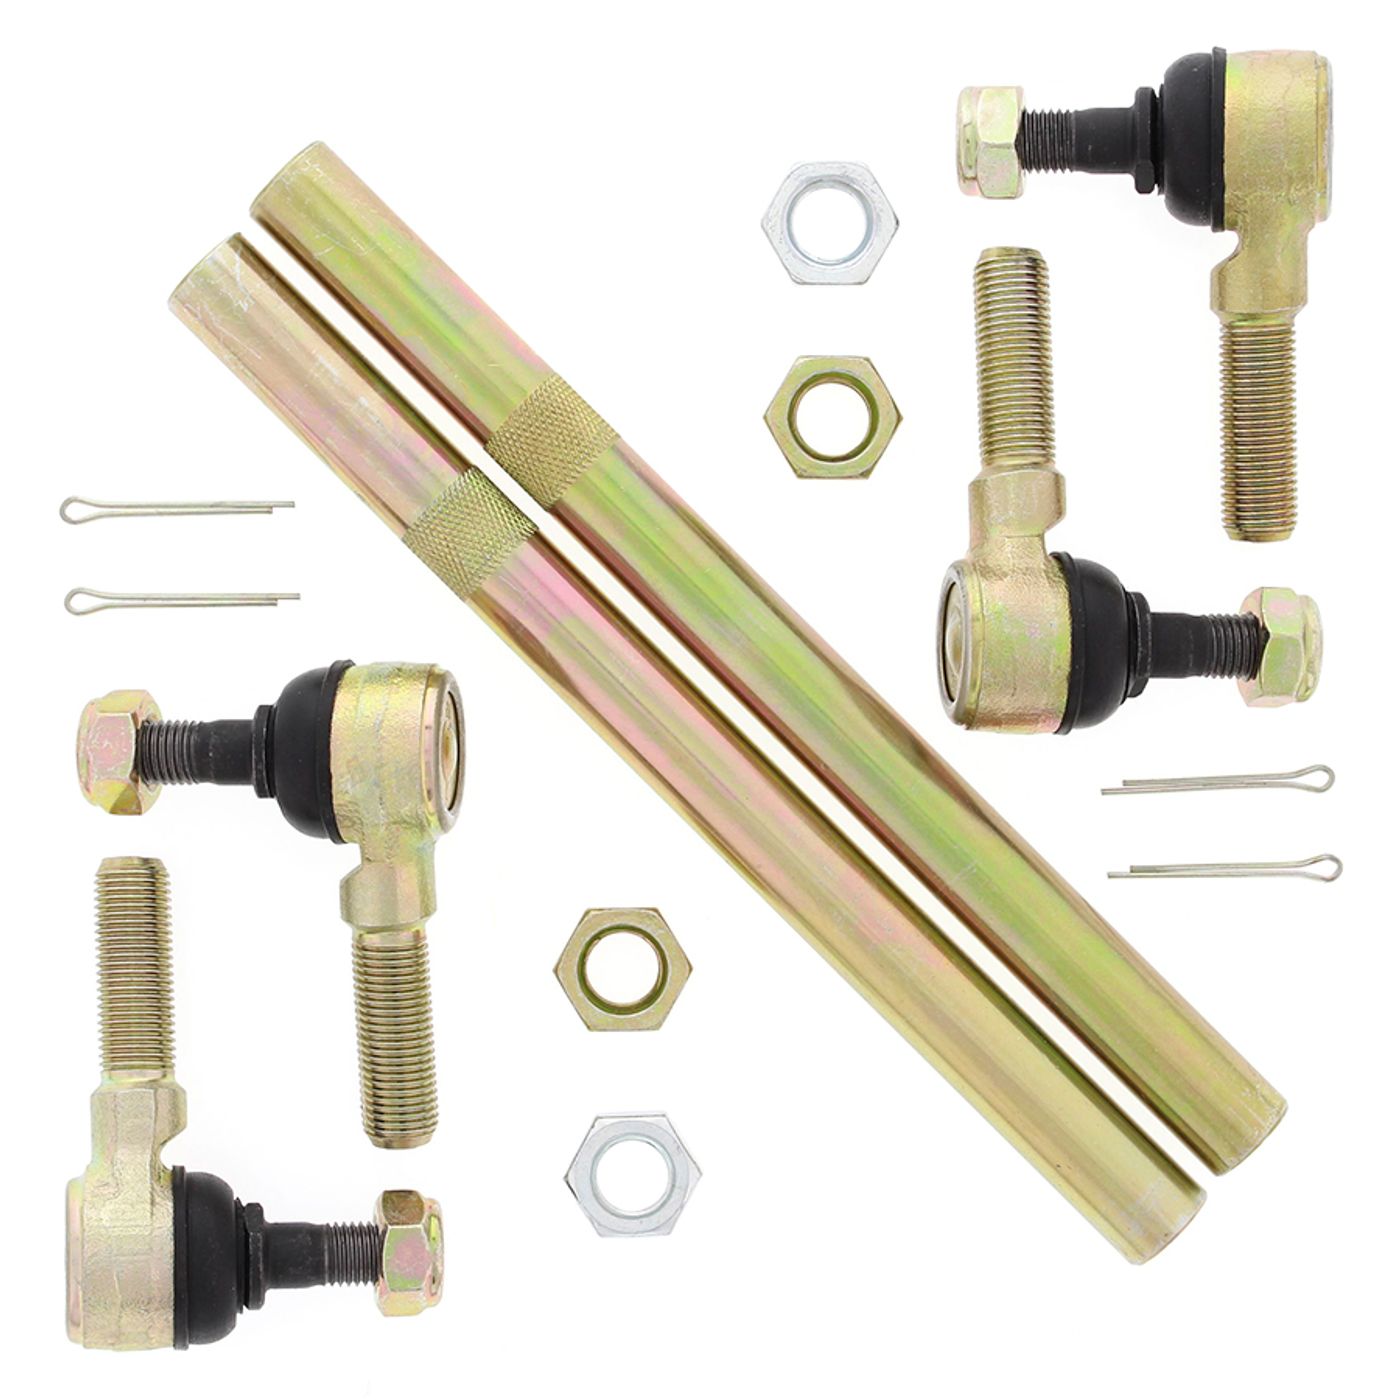 Wrp Tie Rod Kits - WRP521020 image